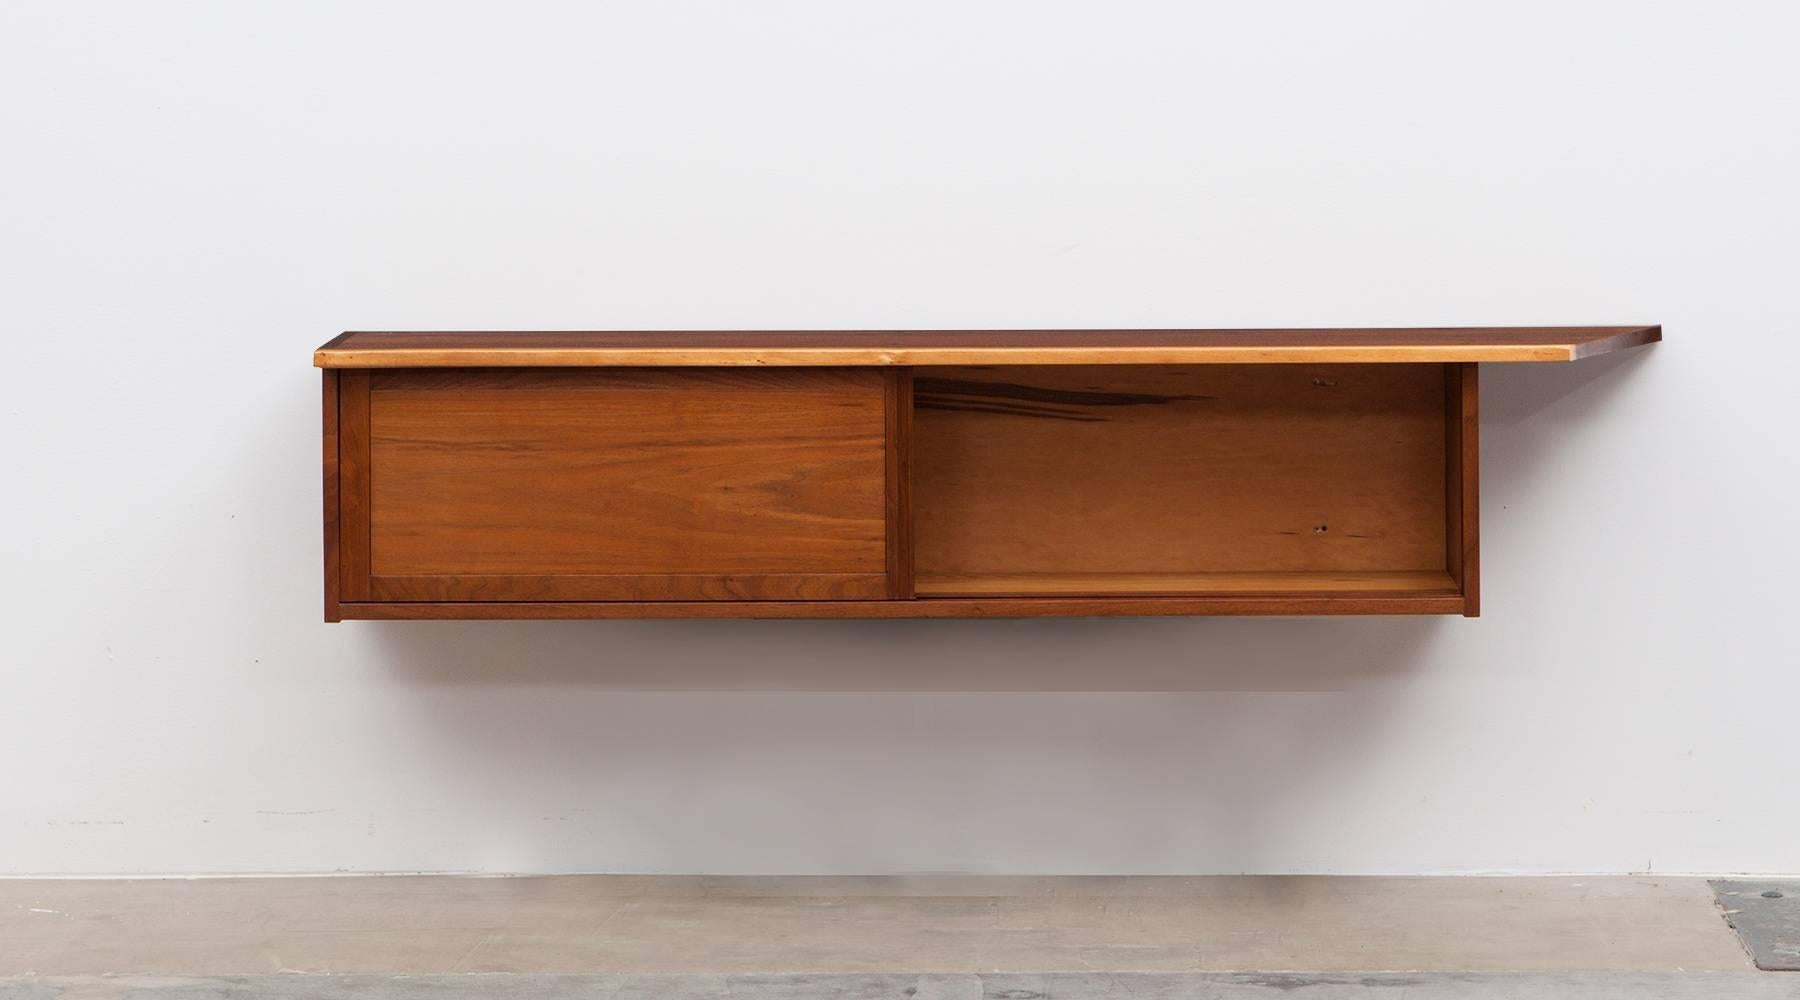 This handcrafted and wall-mounted sideboard by George Nakashima has a beautifully figured American black walnut slab top with an organic and subtle free-form edge. Comes with two sliding doors, containing three shelves. Manufactured by George